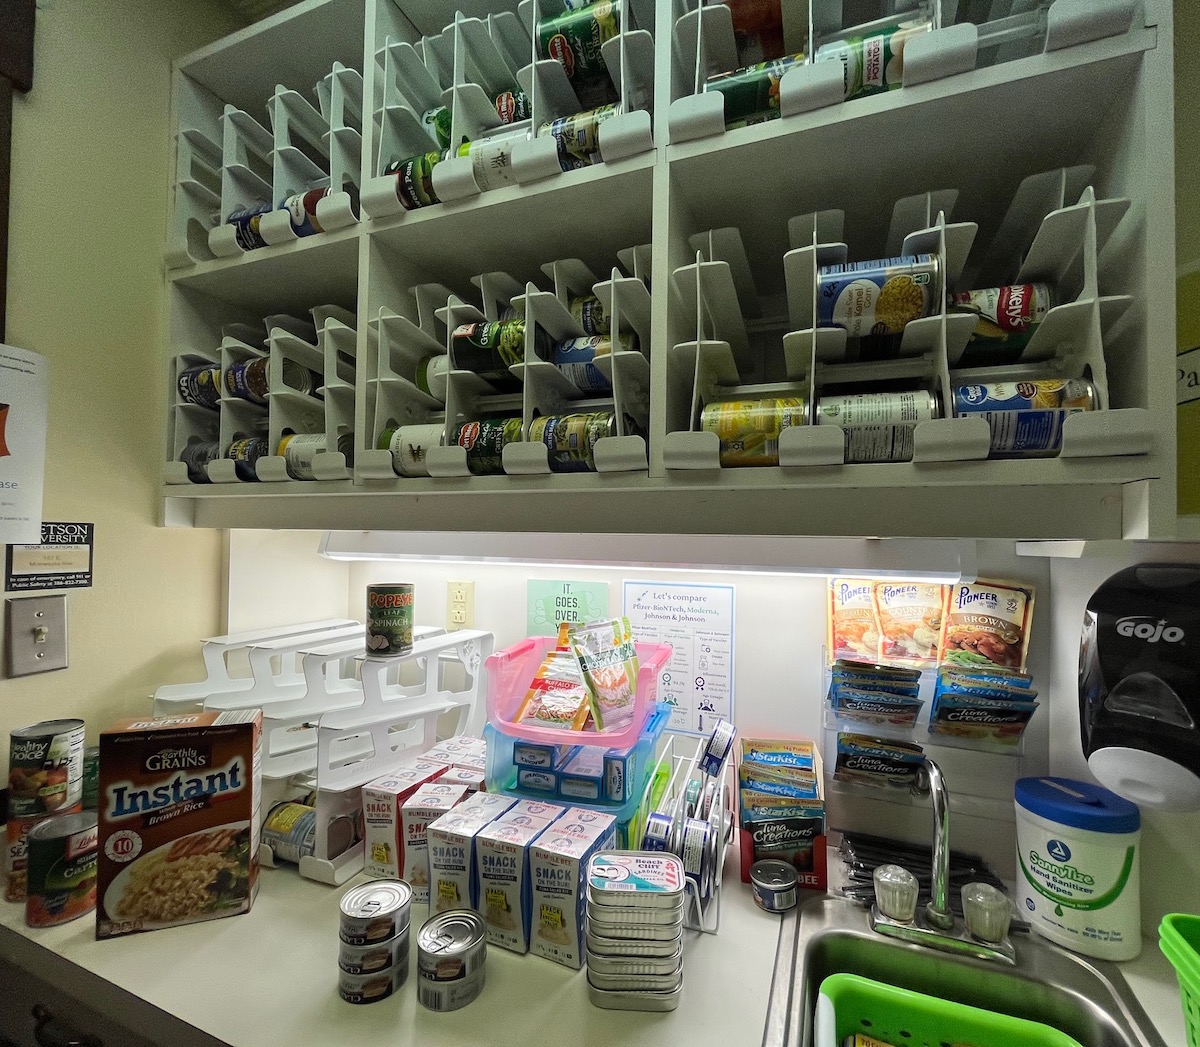 Canned vegetables, meats and other food items are available in the Hatter Food Pantry for students facing food insecurity.